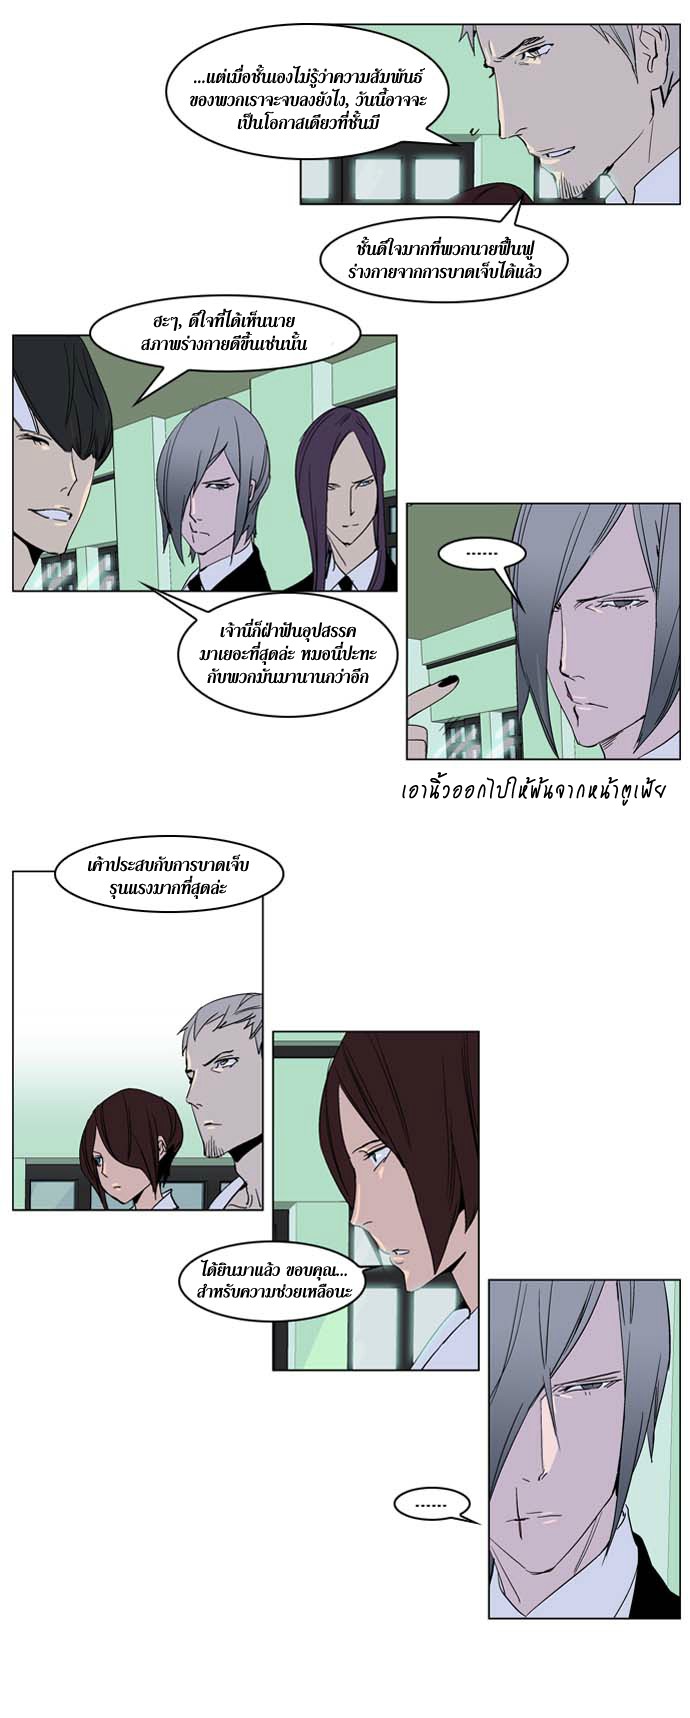 Noblesse 238 011